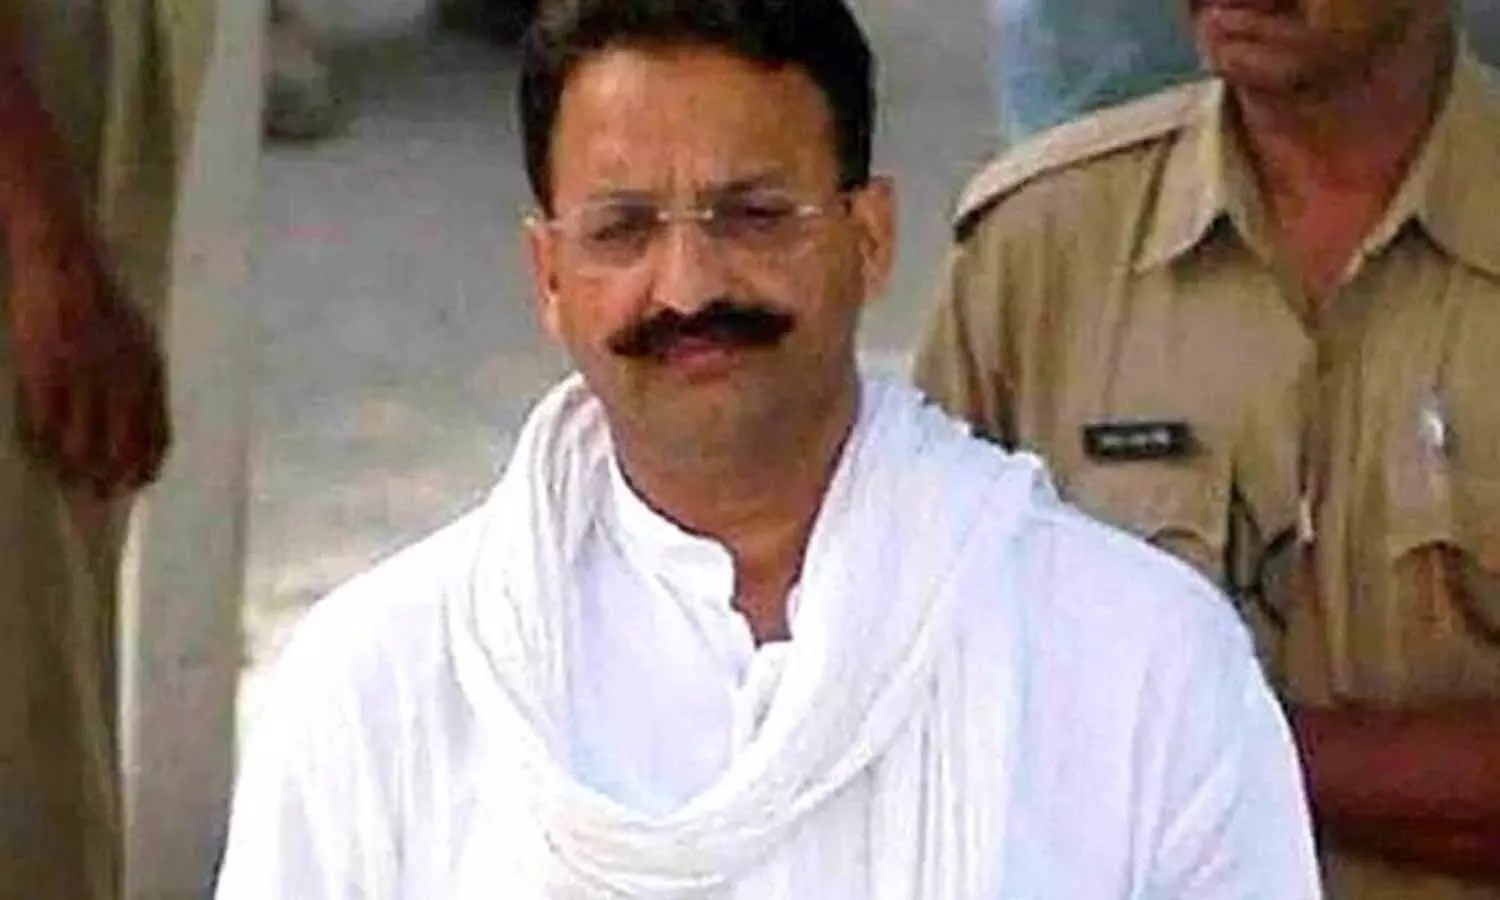 Once again the administrations stick has been run on Mukhtar Ansari and his associates.